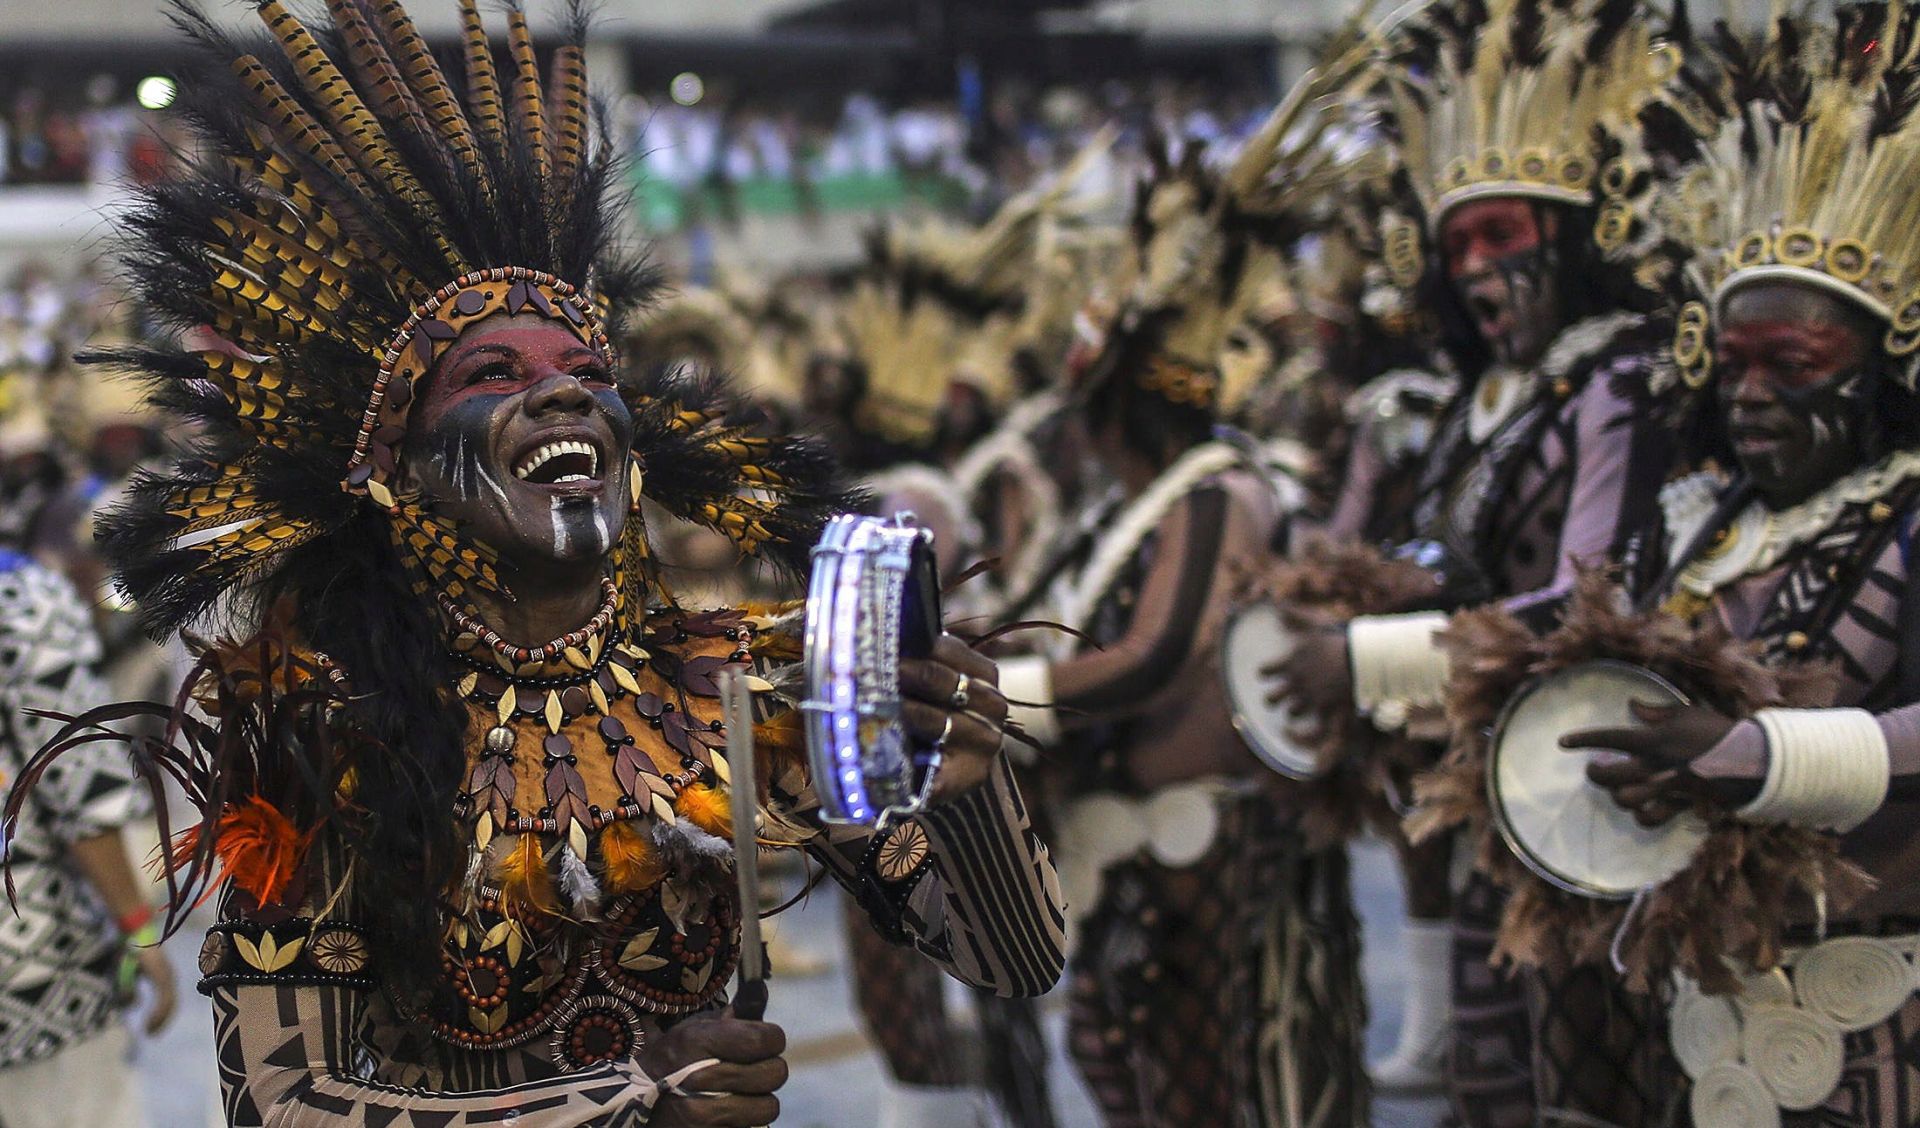 epa05818334 Members of the Special Group of the Beija-Flor samba school  perform during a parade held during Rio de Janeiro's Carnival at the Sambodromo in Rio de Janeiro, Brazil, 26 February 2017. A float accidentally ran over a group of participants injuring eight people after it lost control and crashed against one side of one of the pavillions, it was when it reversed to get back on track when it ran over eight of the participants taking part in the parade.  EPA/ANTONIO LACERDA